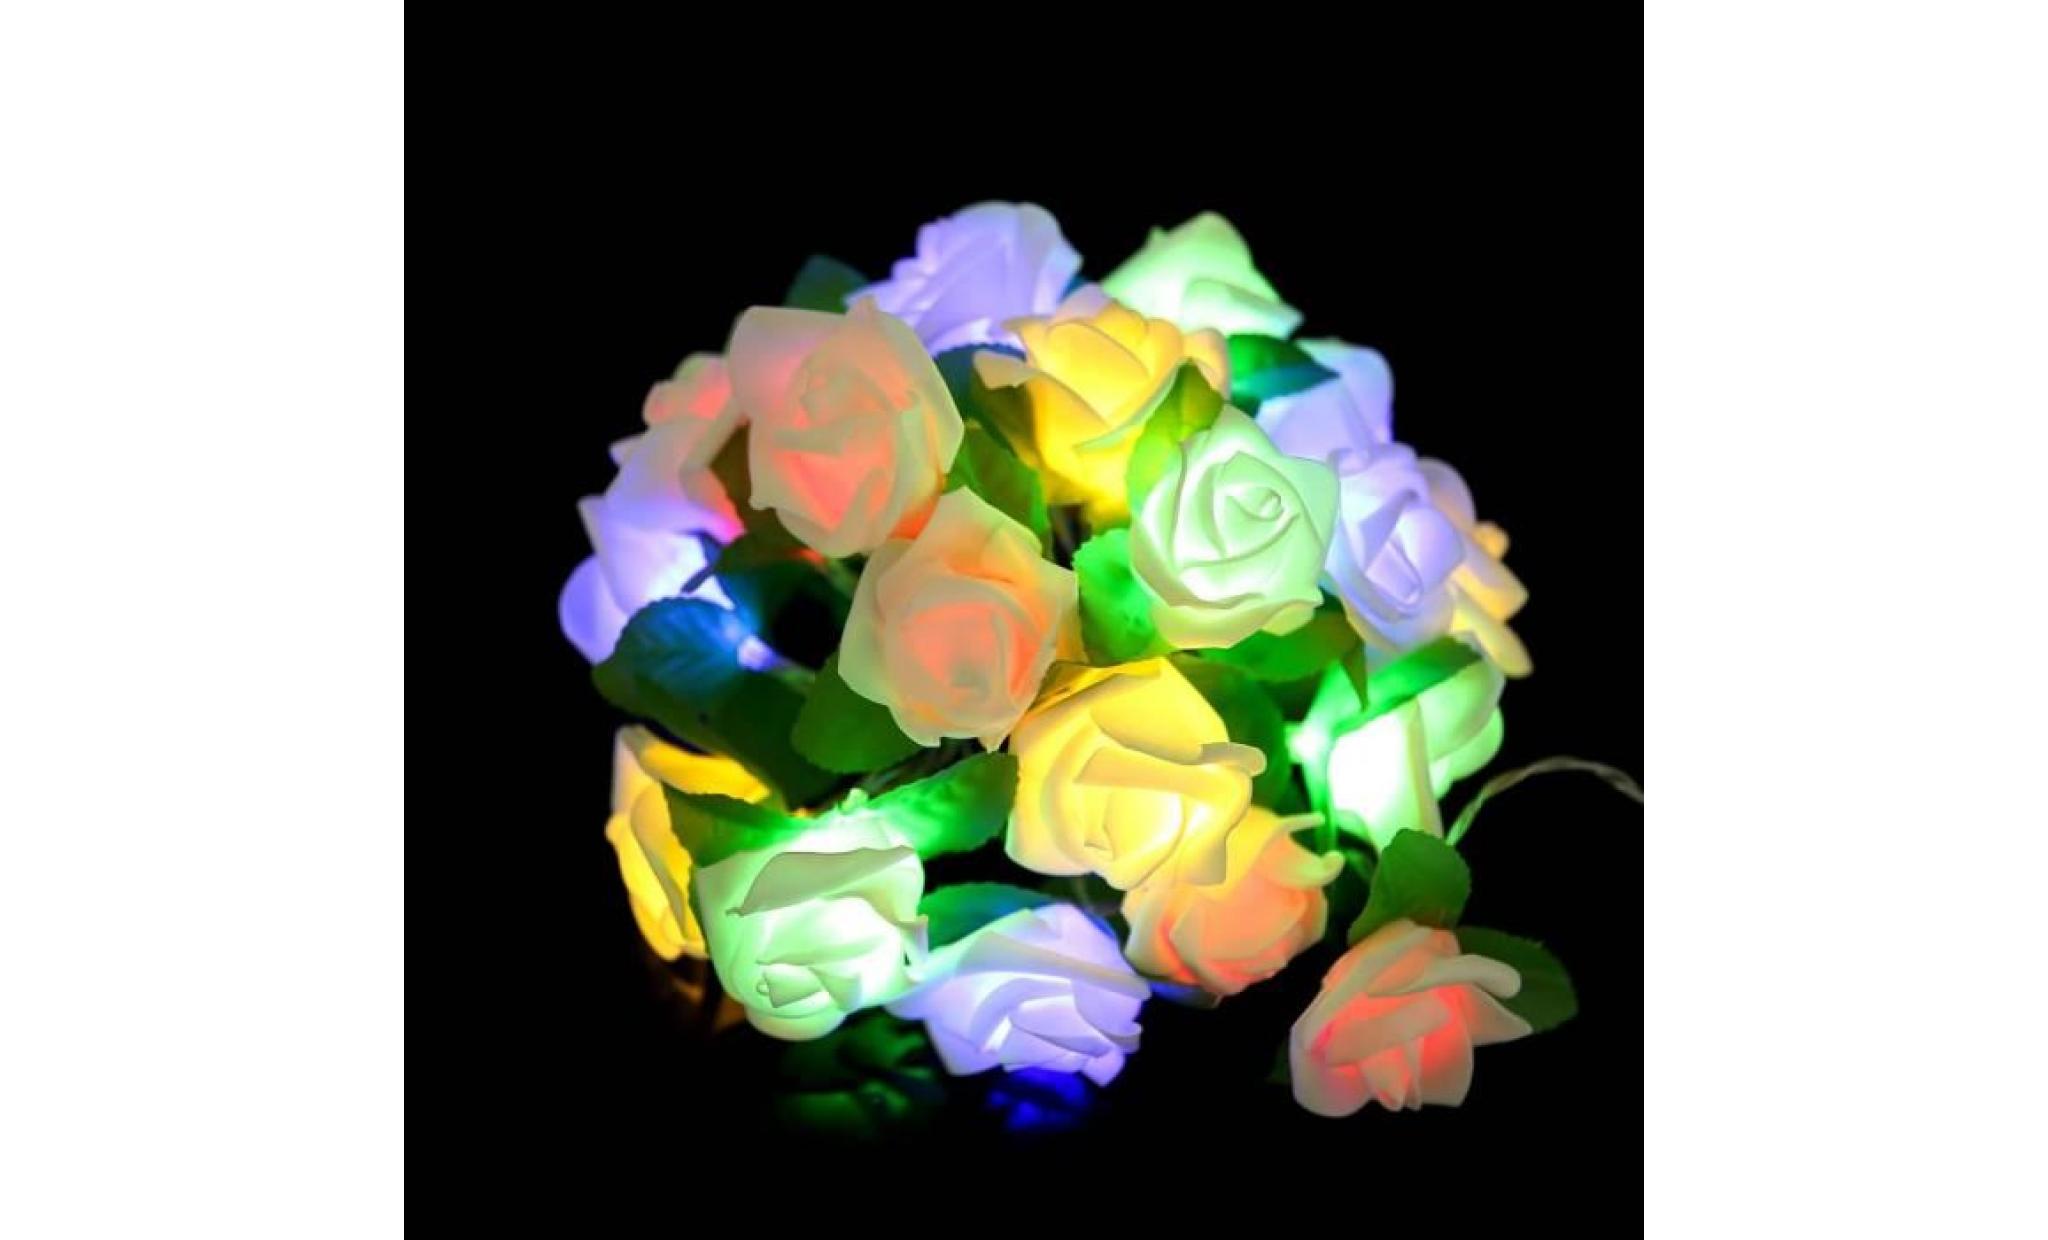 rose led window curtain lights string lamp party decor with 20 led beads qinhig3661